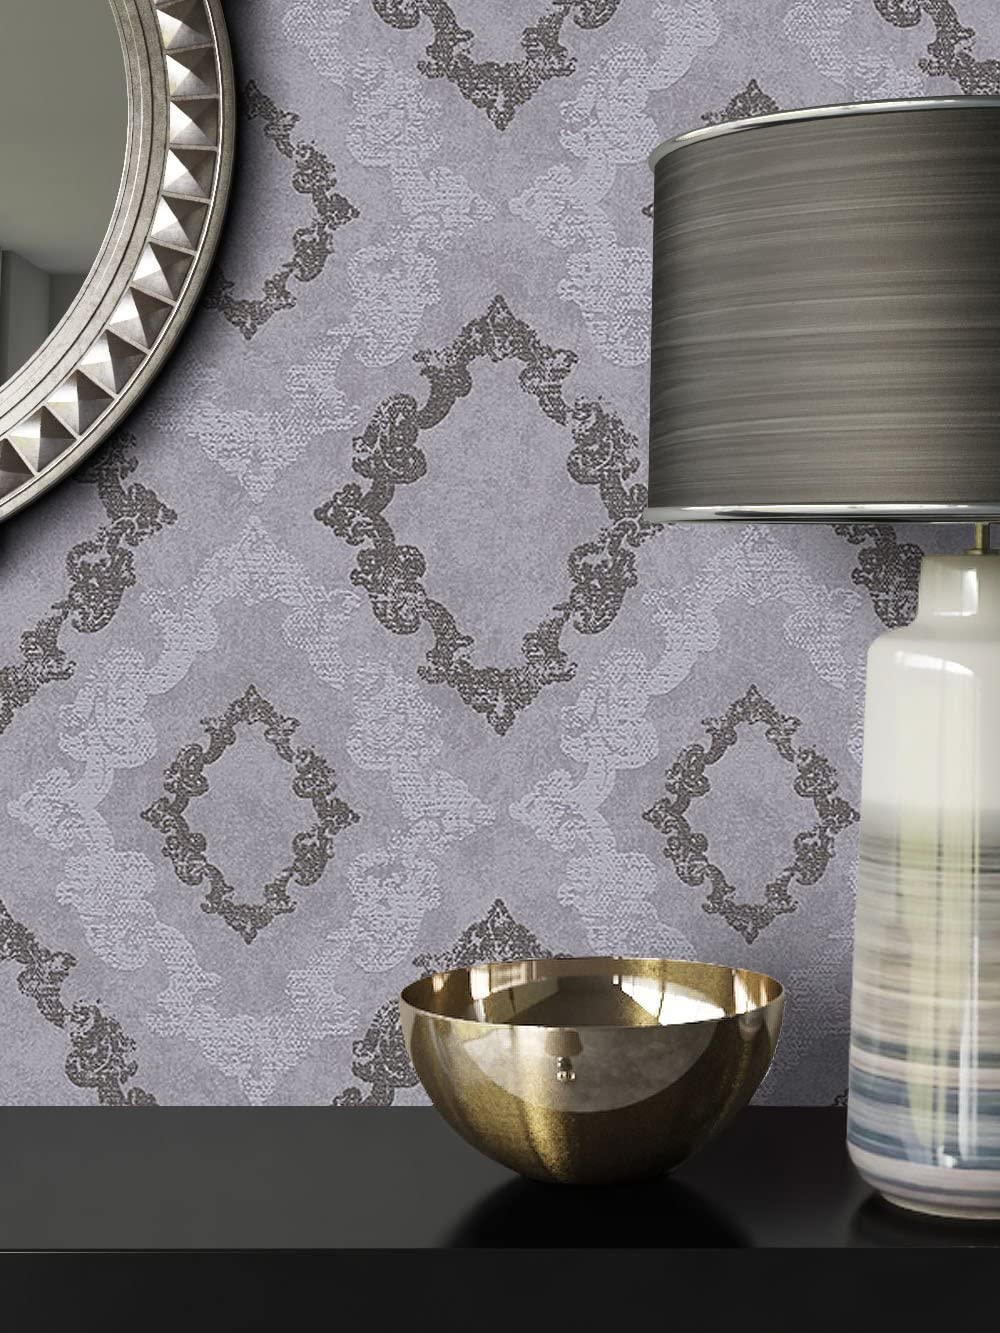 Newroom Baroque Wallpaper Grey Non-Woven Classic, Country House, Modern, Natural Beautiful Modern and Elegant Design Look Includes Wallpaper Guide